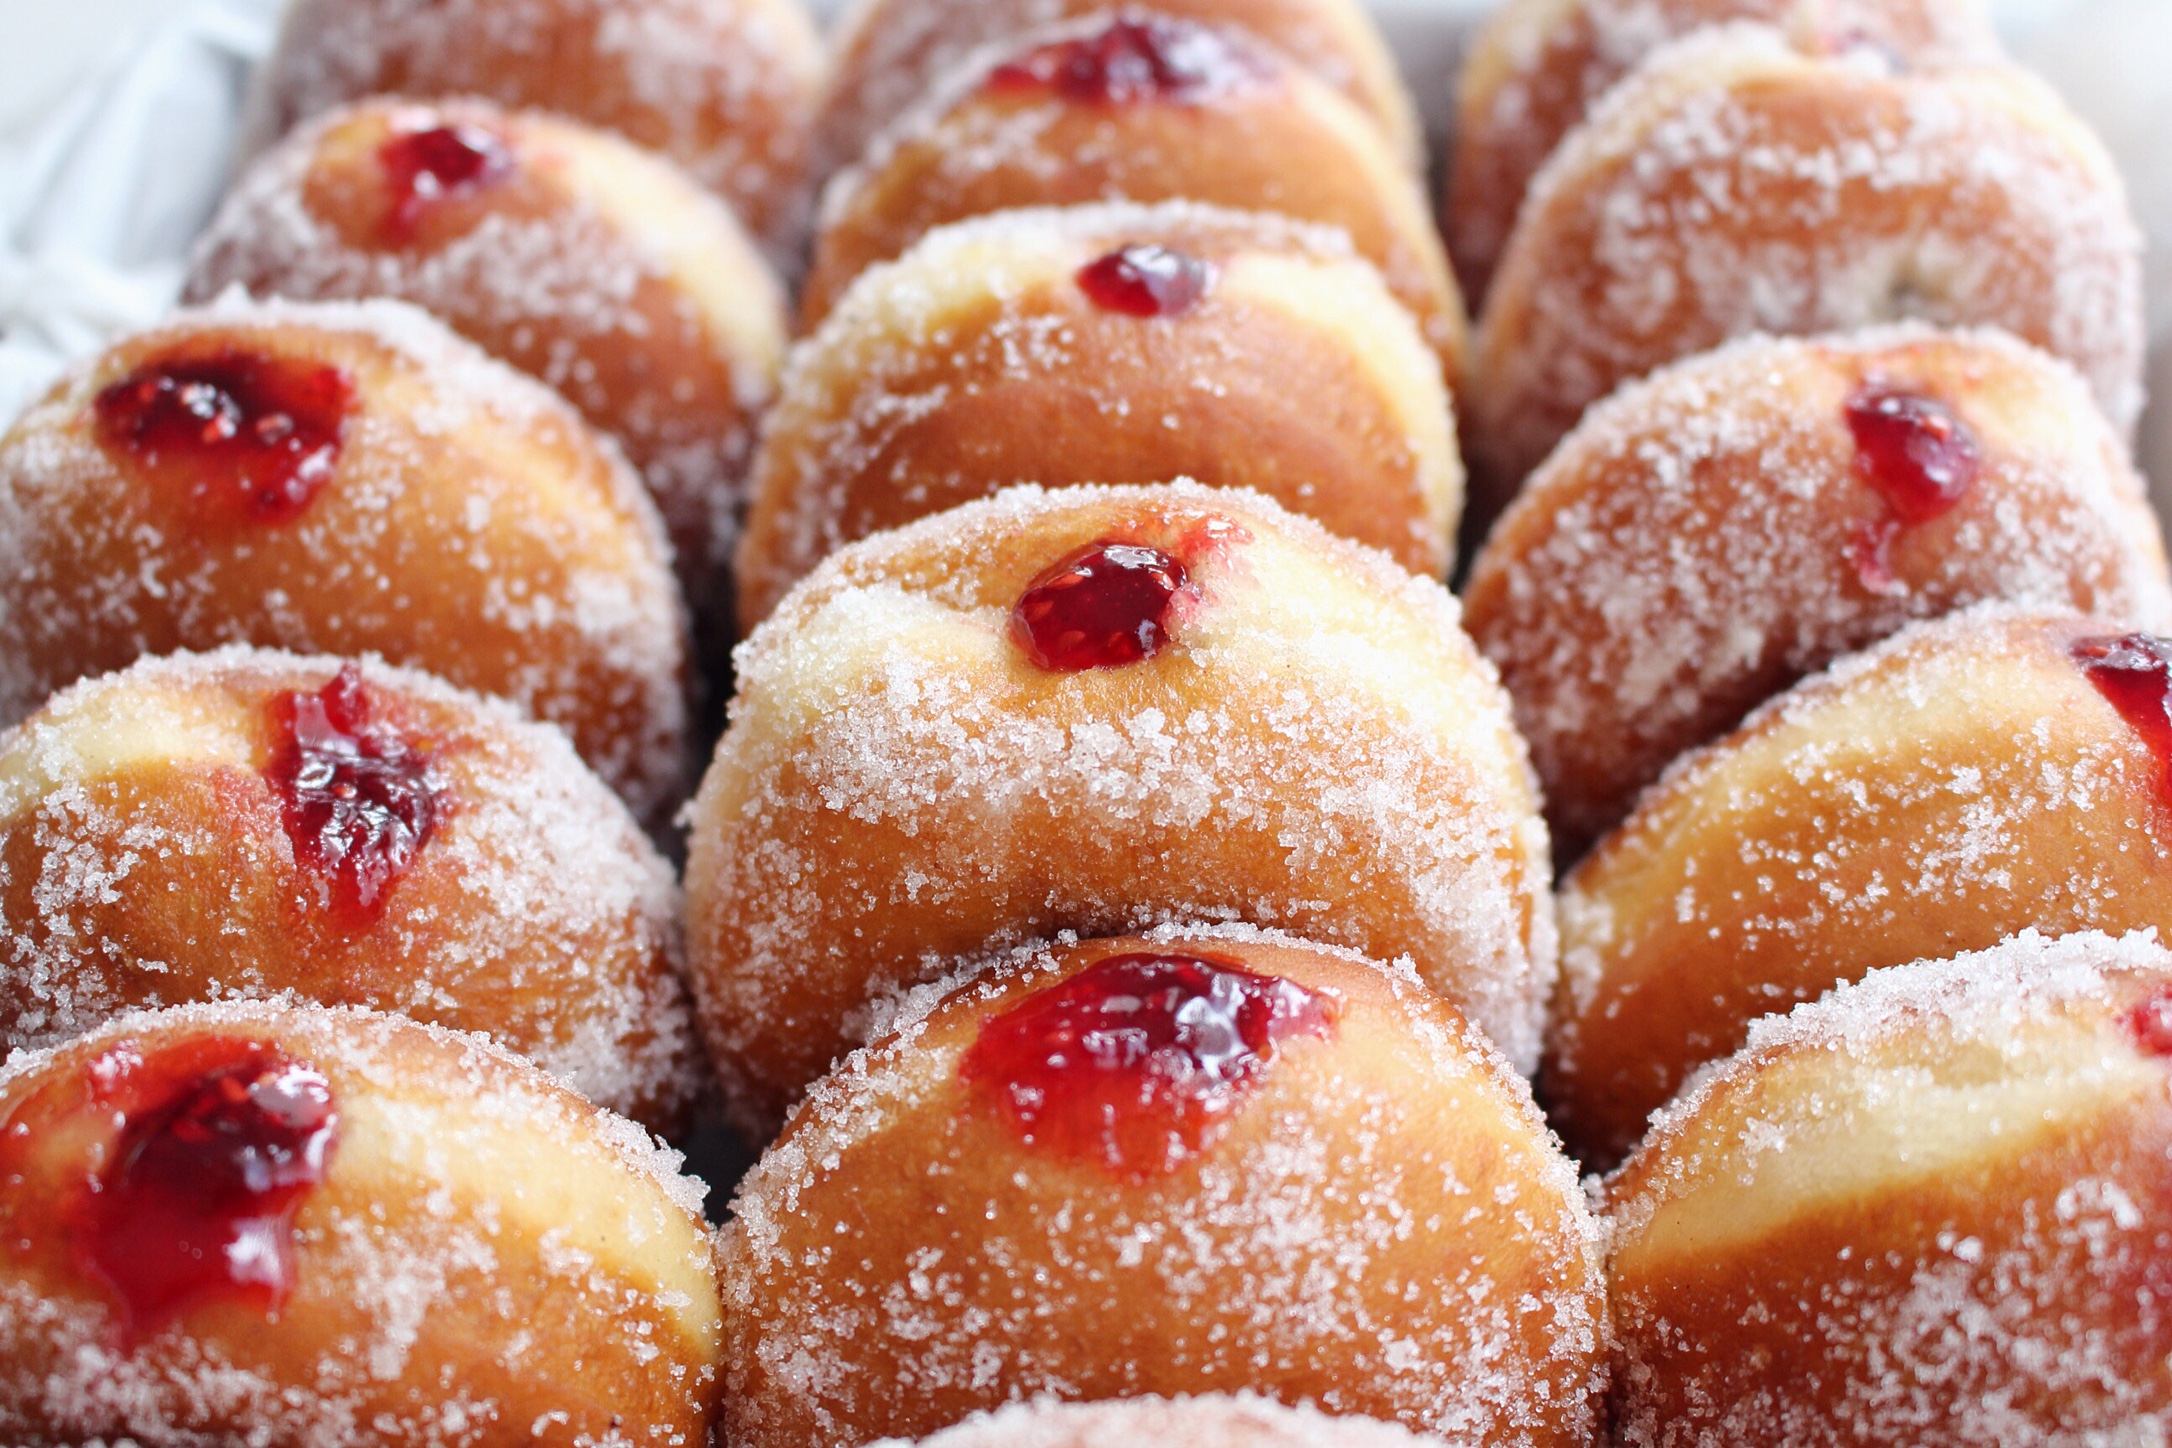 Raspberry Jam Donuts With Vanilla Sugar The Sweet And Simple Kitchen